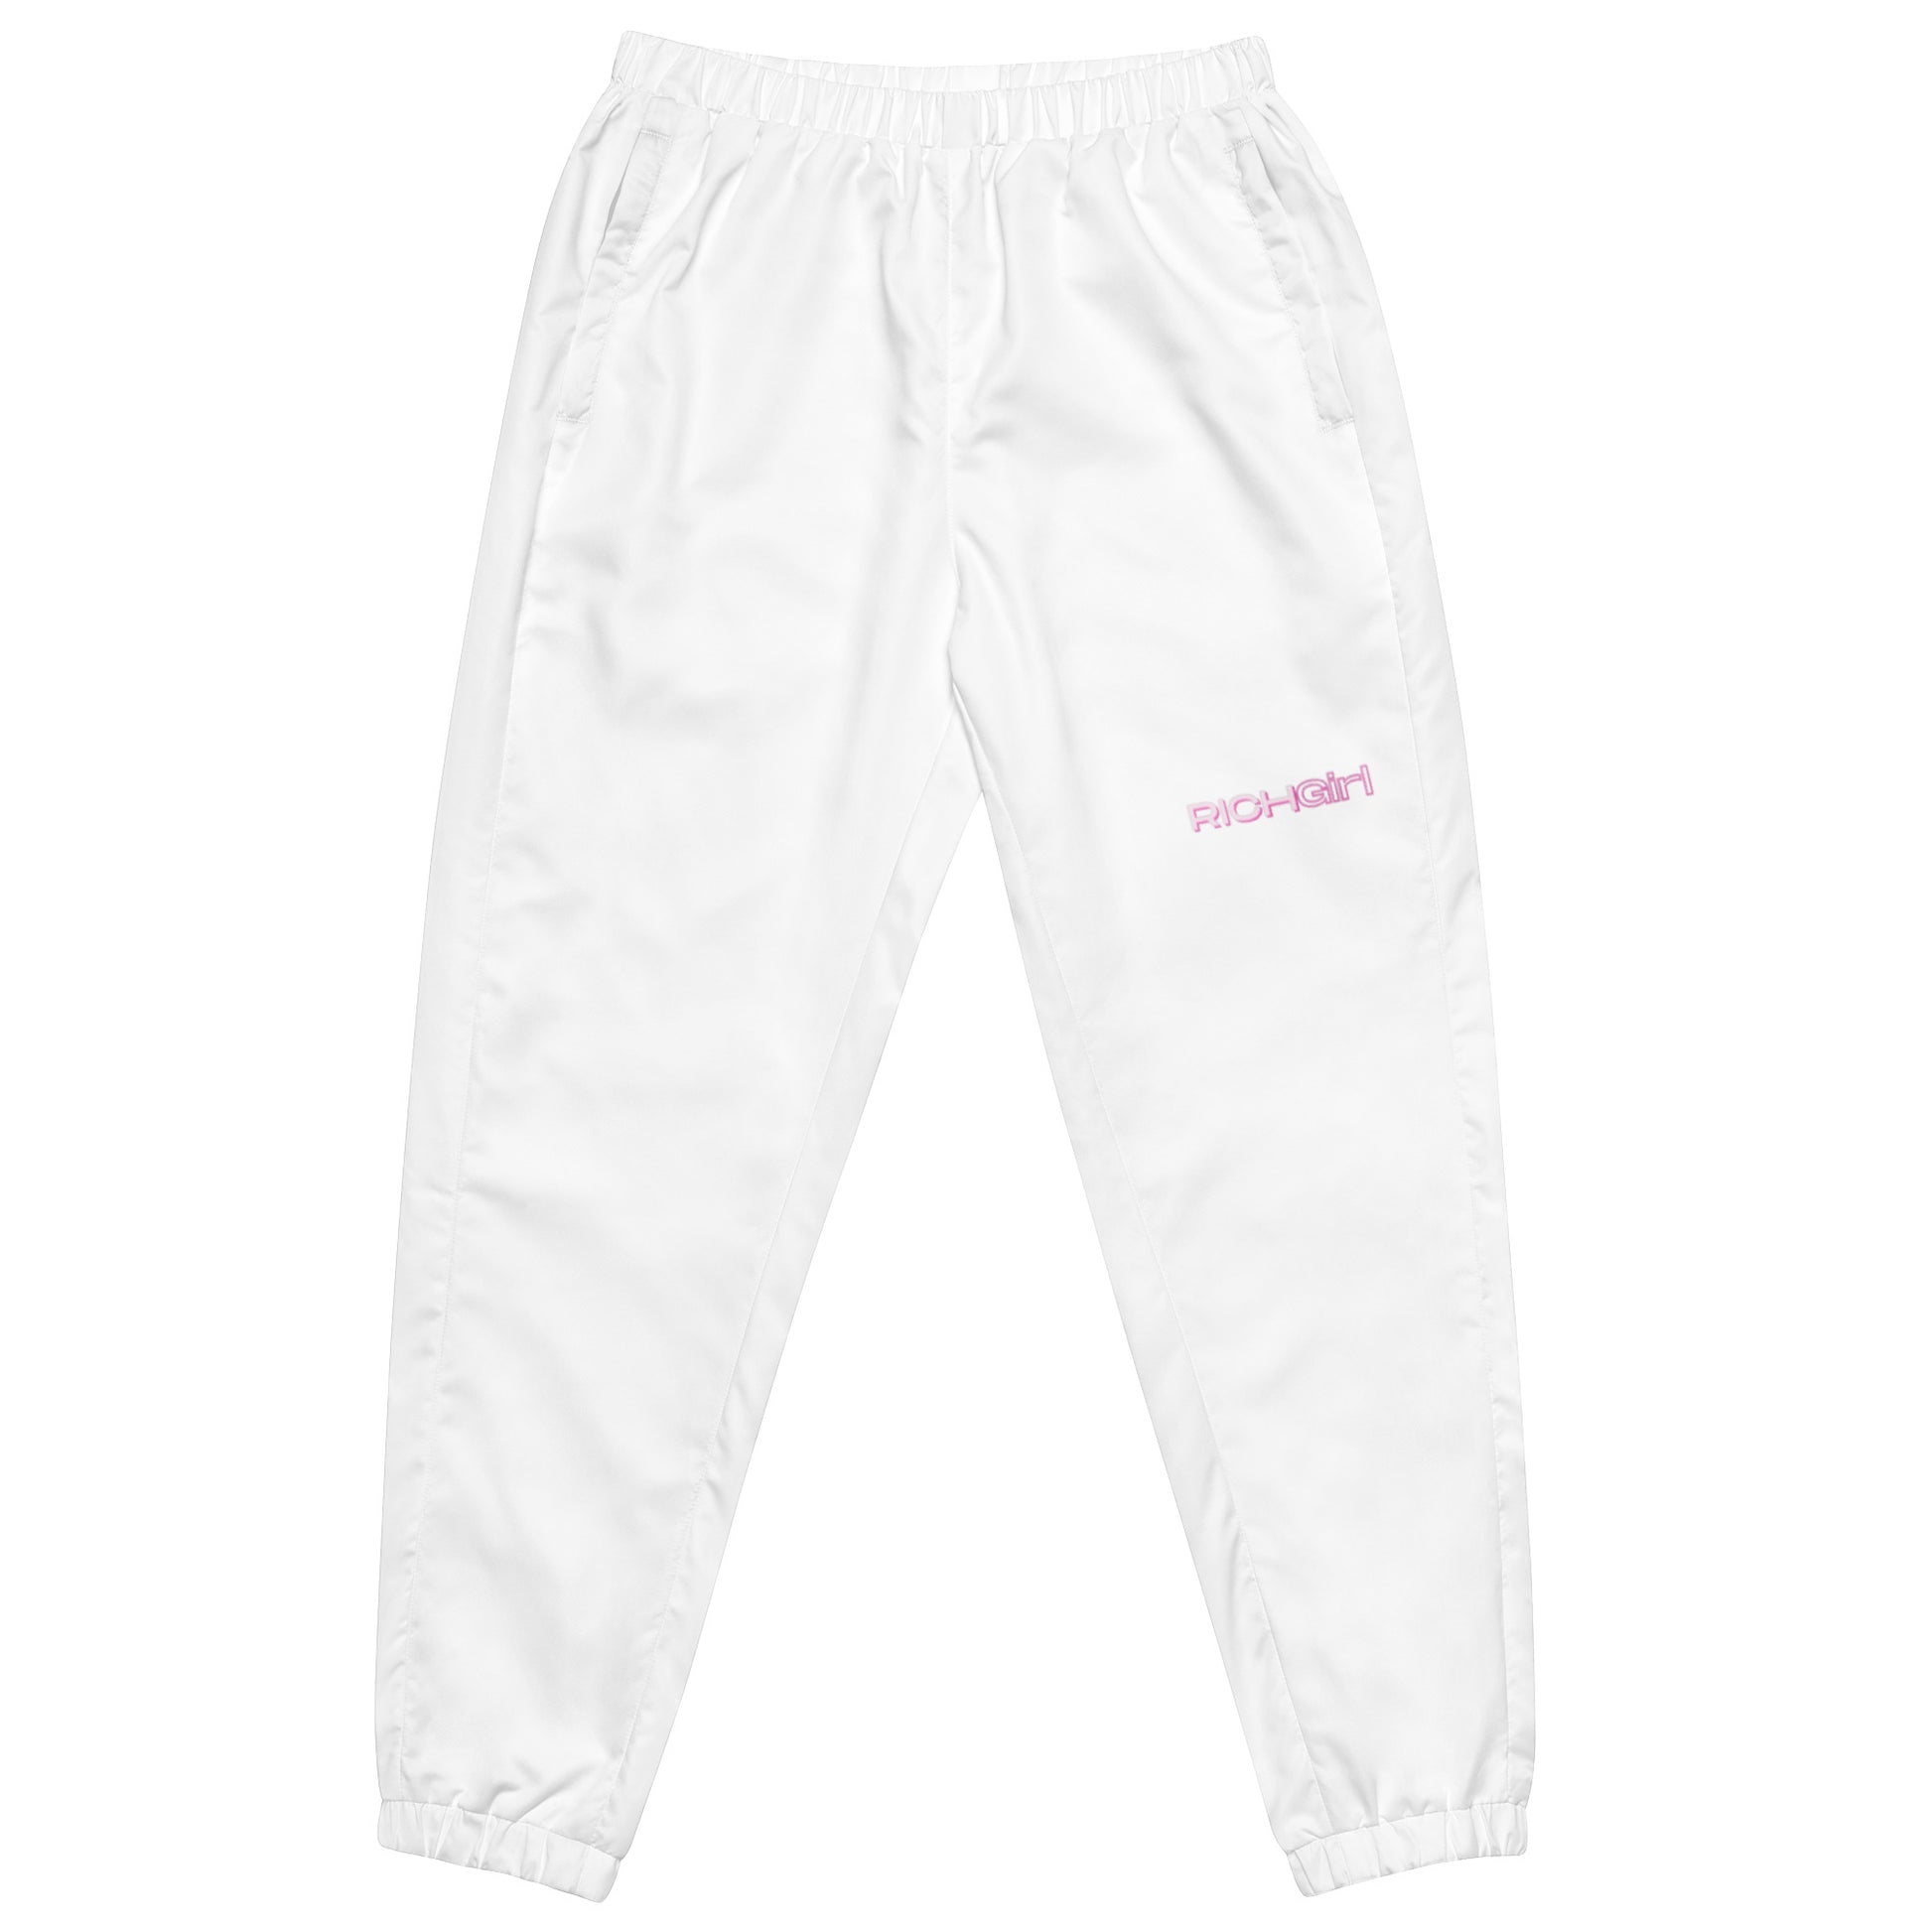 Exclusive Rich Girl Track Pants – The Rich Girl Label